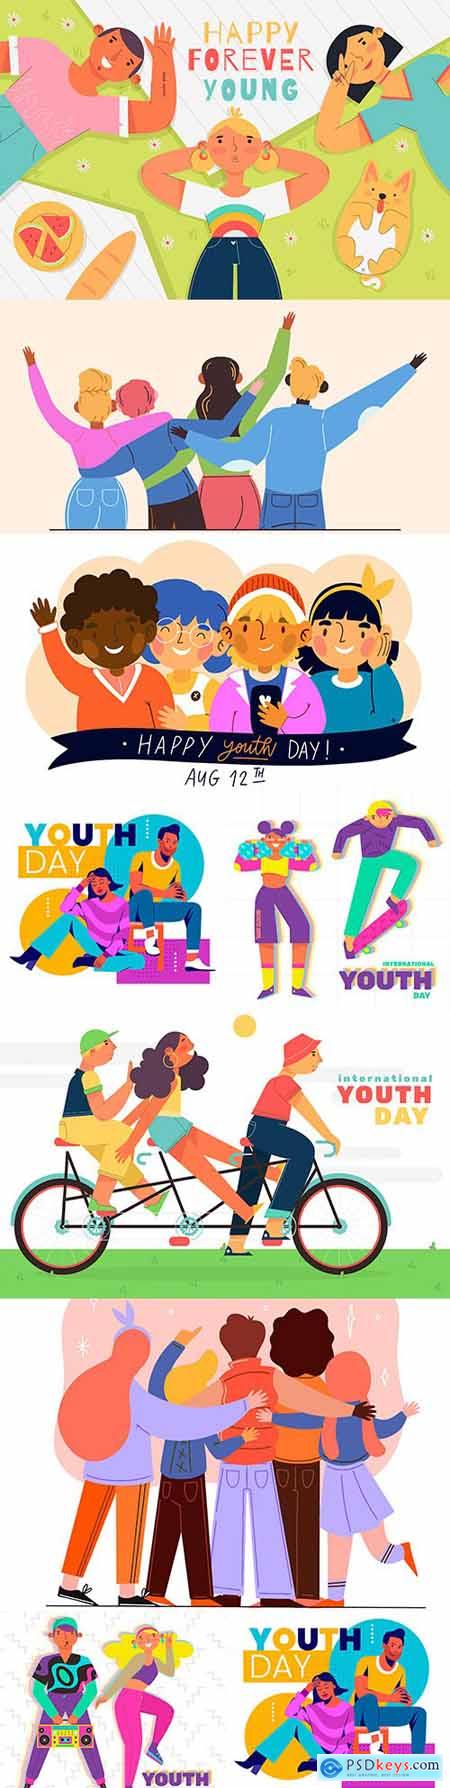 Happy Youth Day Illustration Flat Design Concept